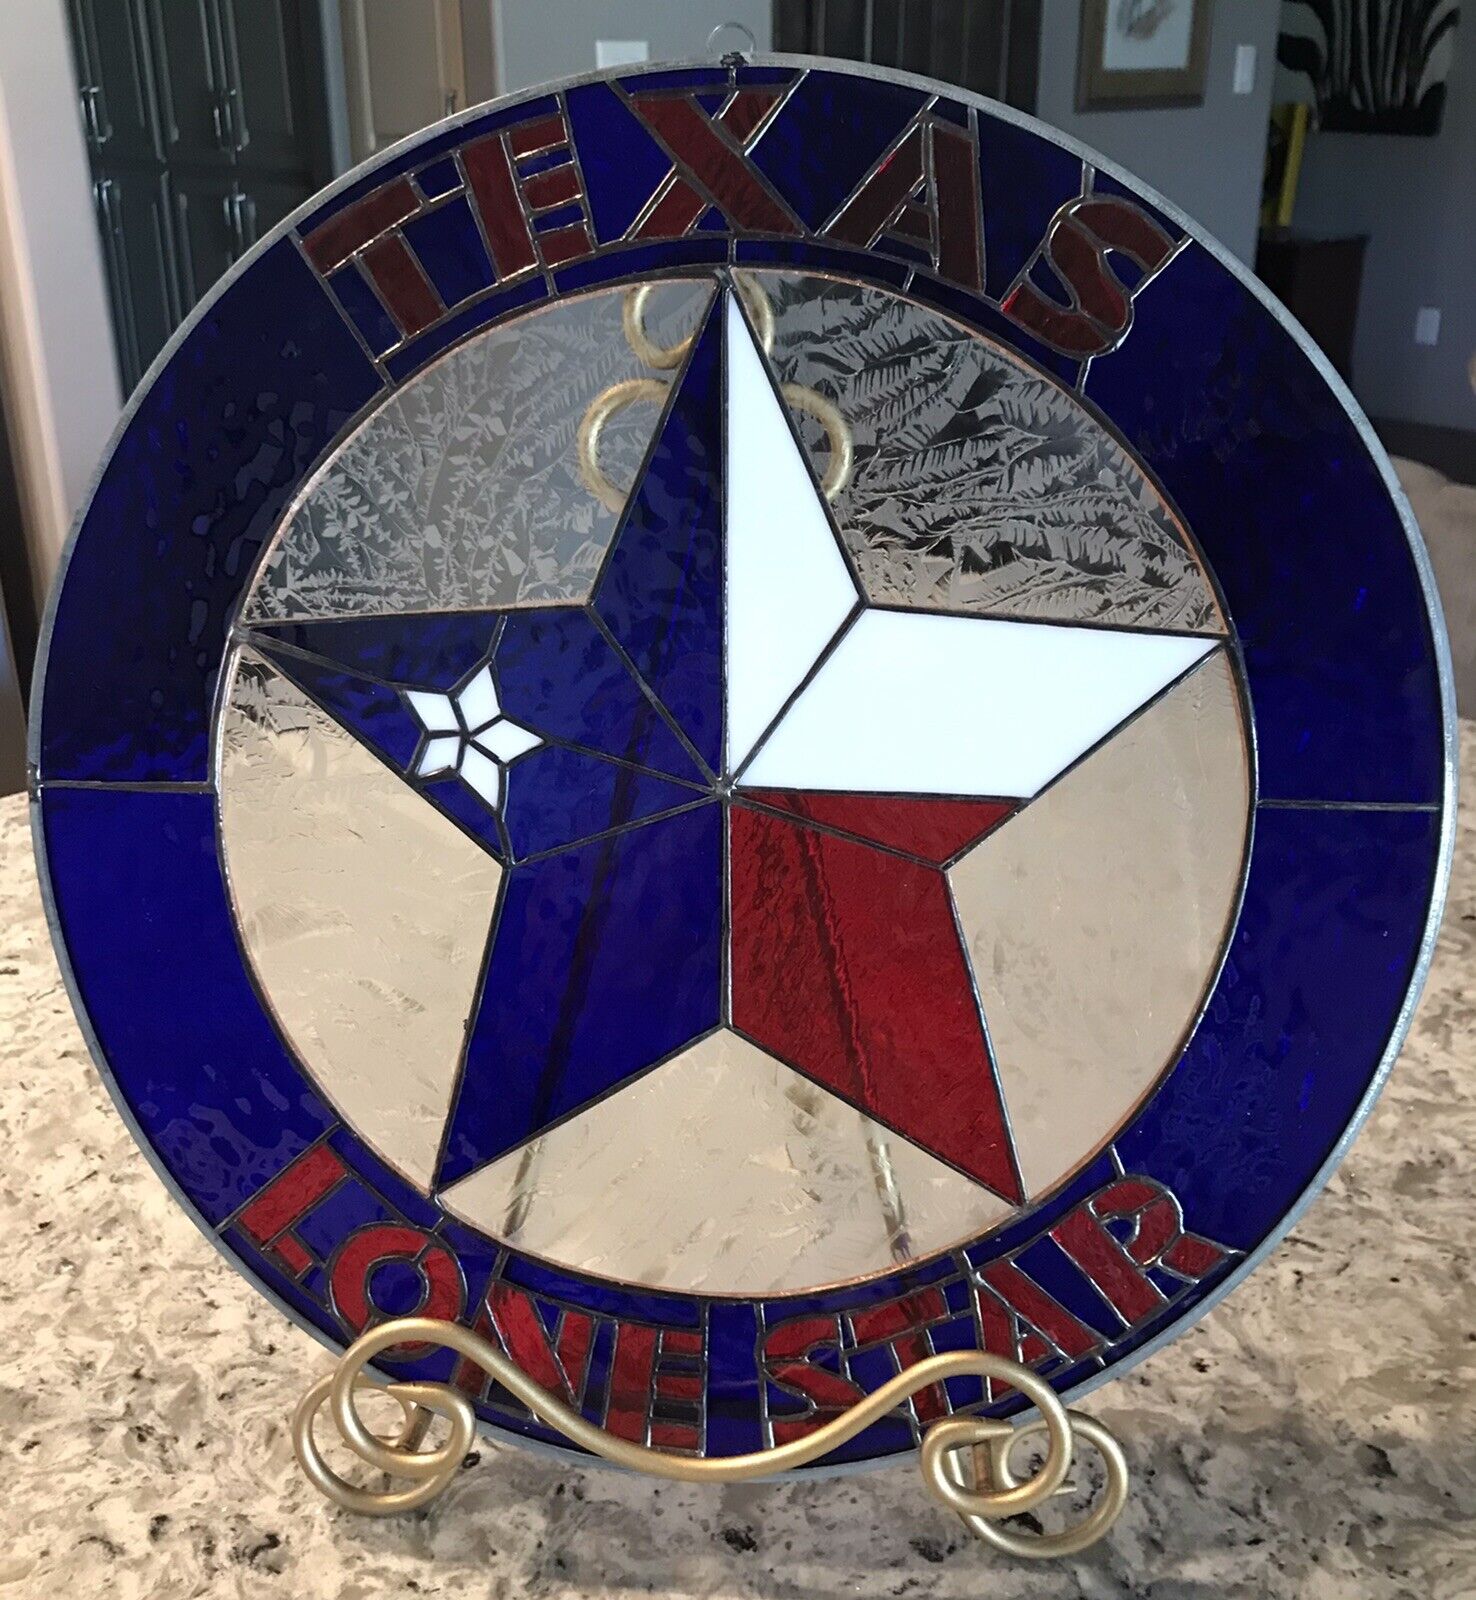 VINTAGE STYLE TEXAS “LONE STAR “ 13 INCH ROUND HANDCRAFTED STAINED GLASS SIGN